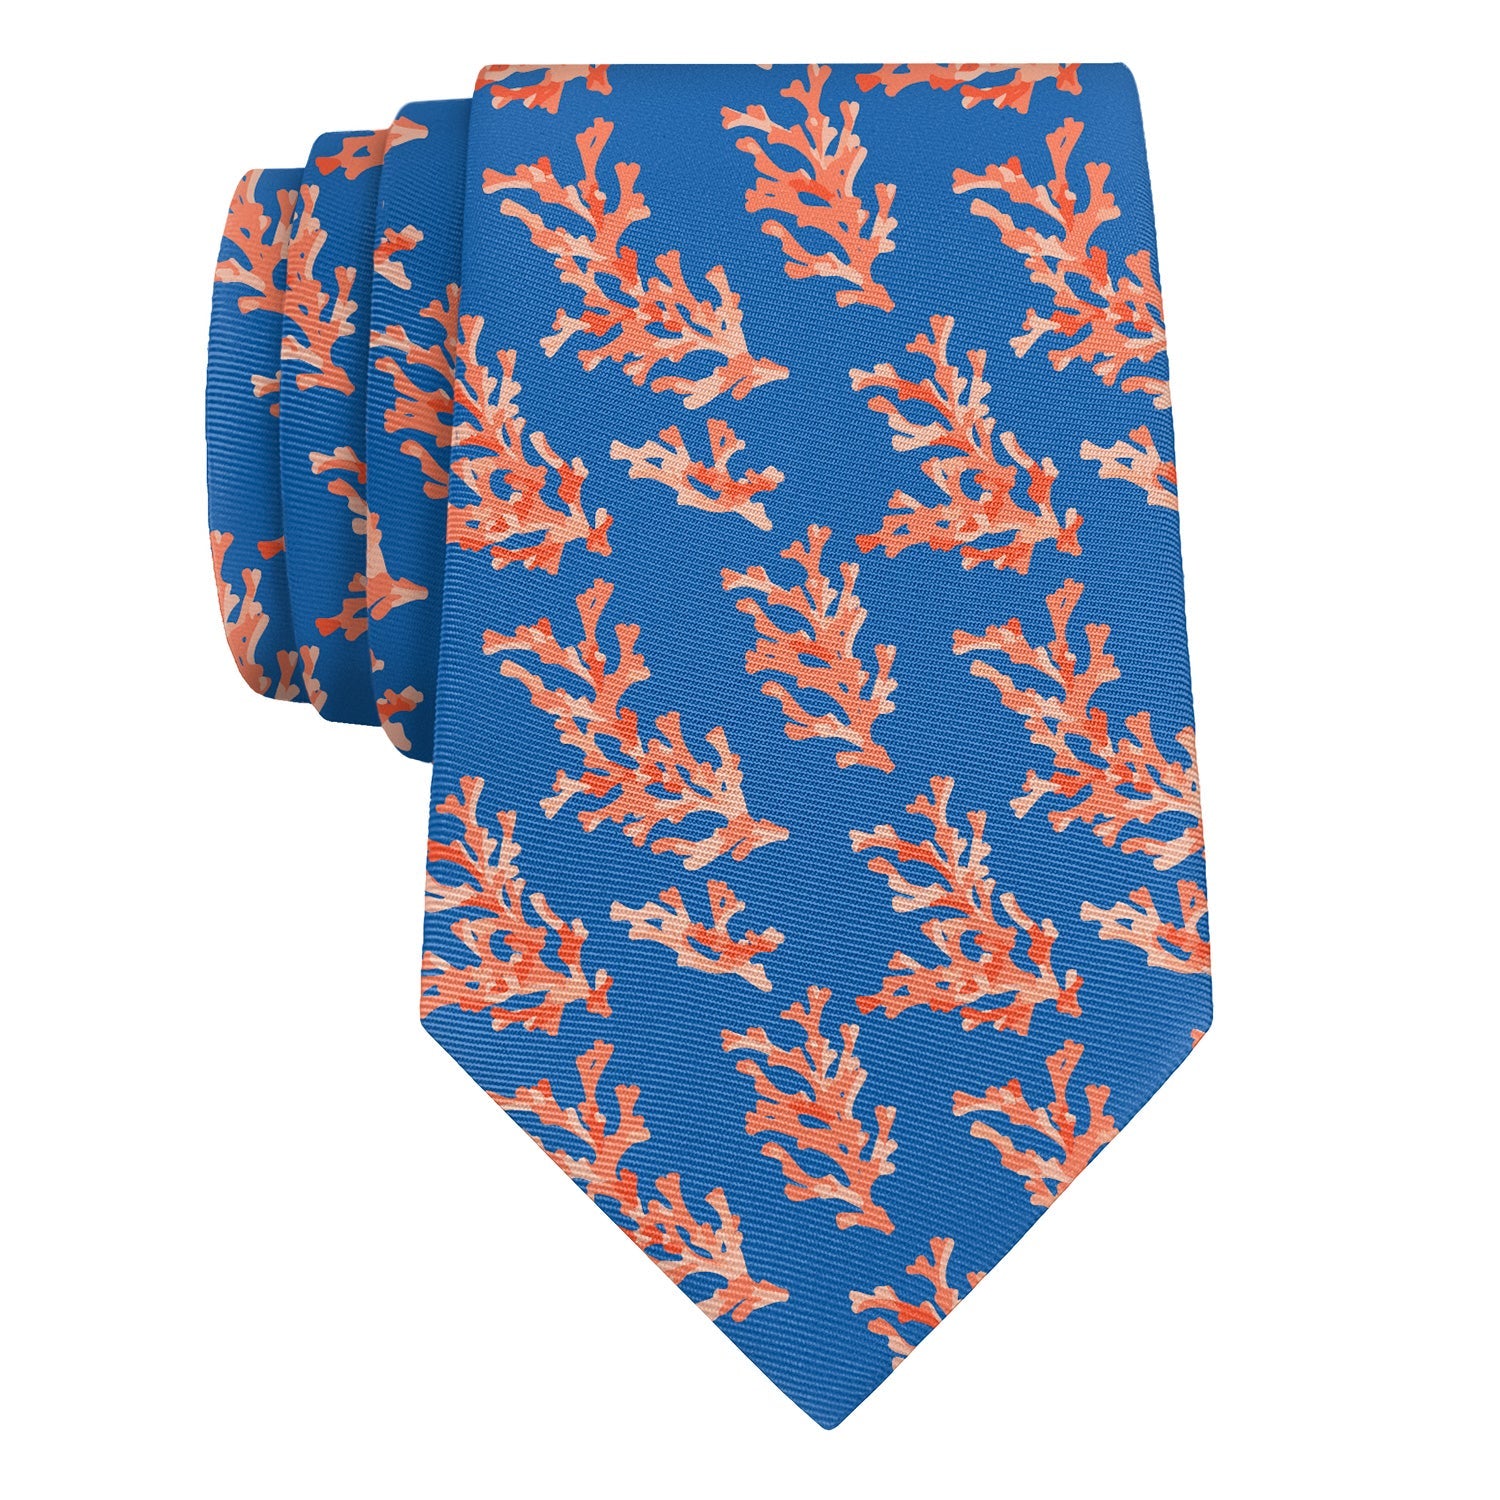 Coral Reef Necktie - Rolled - Knotty Tie Co.